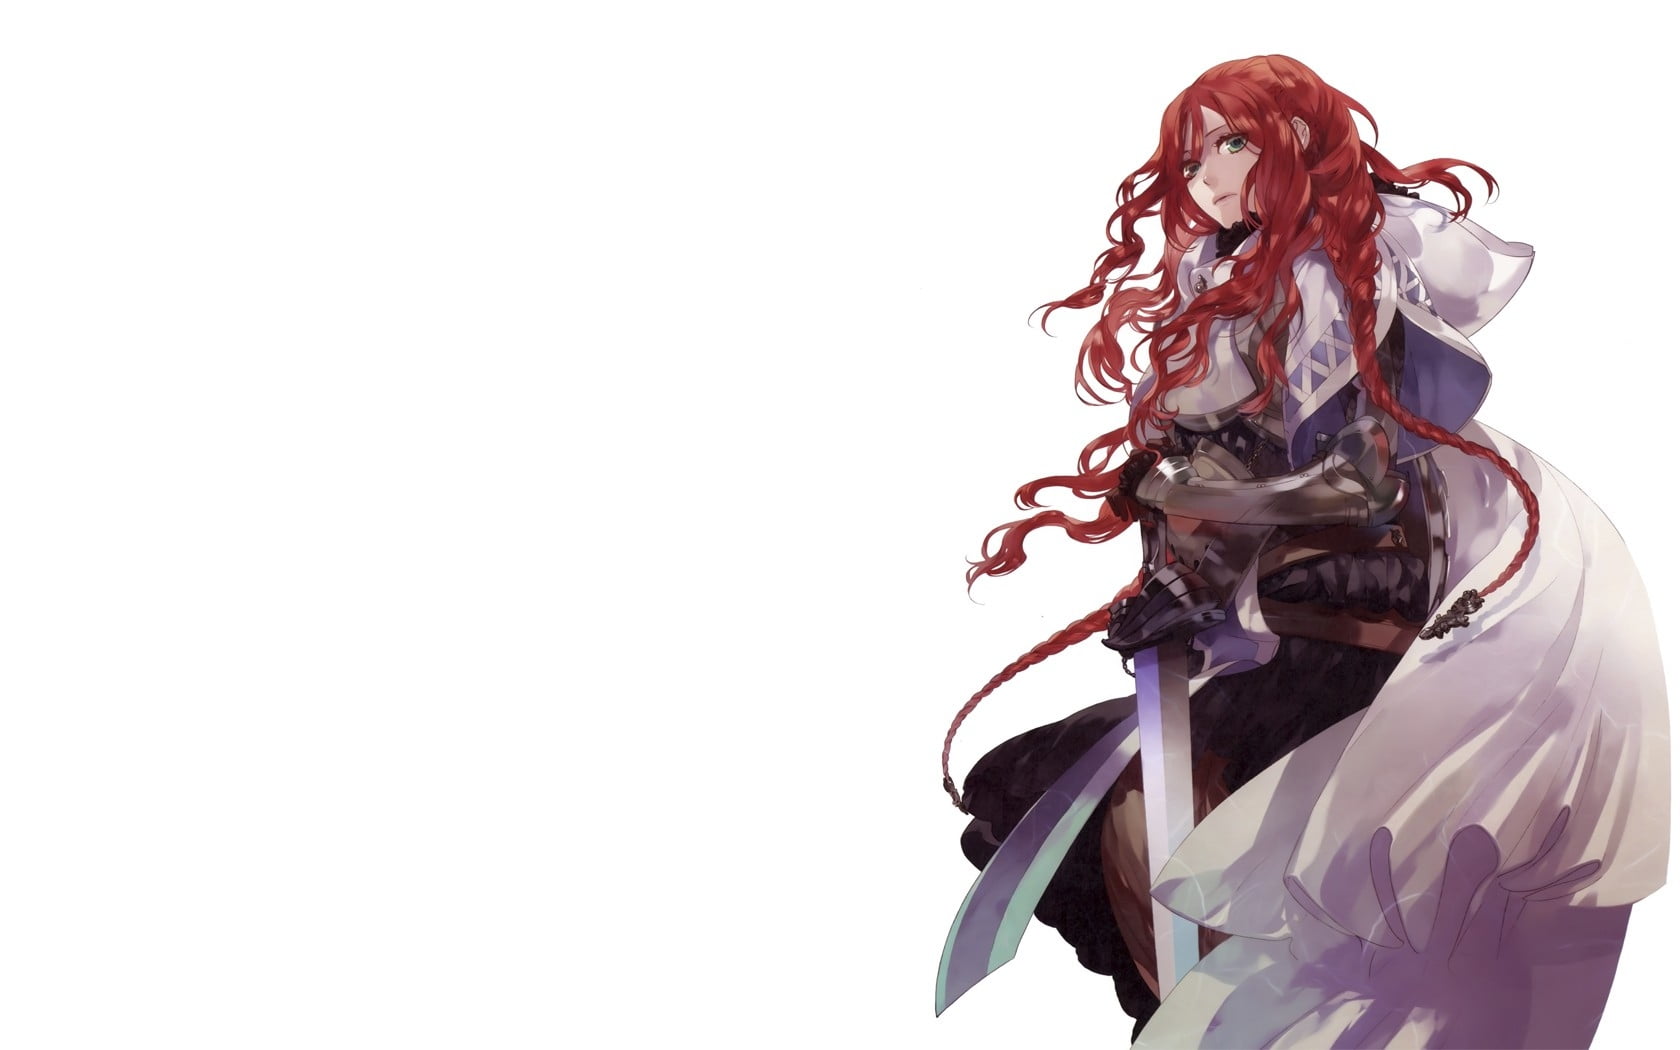 Top Anime Girl With A Sword And Red Hair 